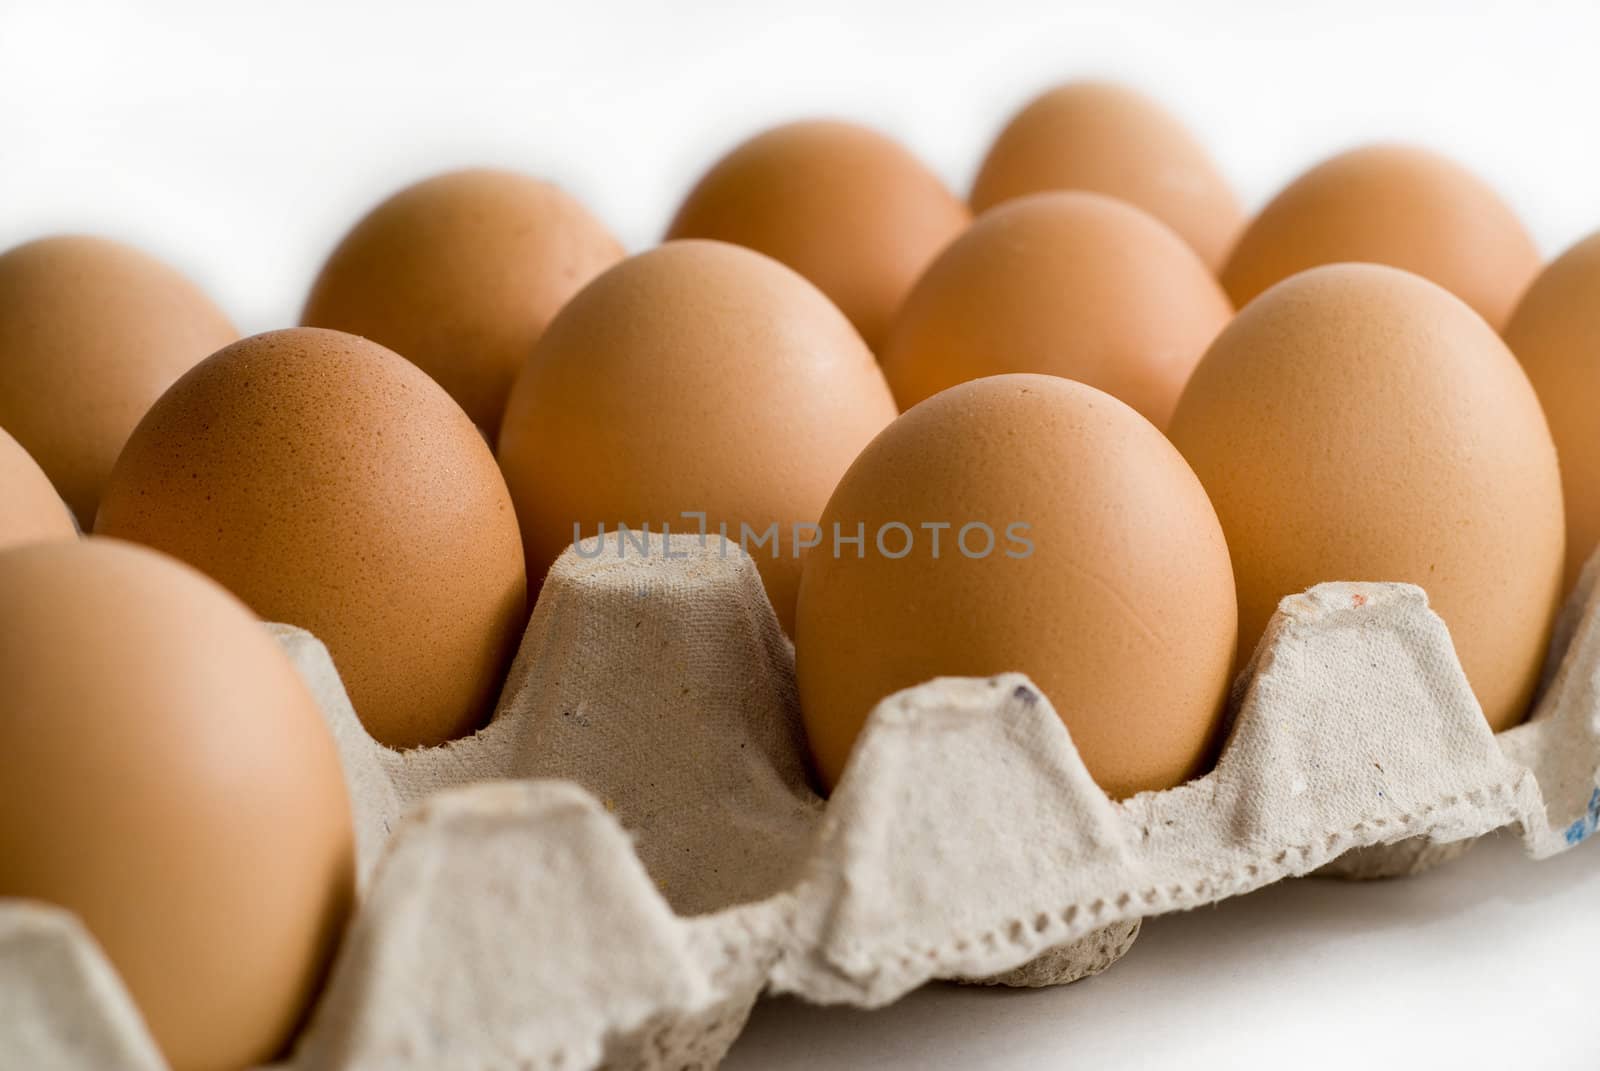 Row of eggs in box - top down view - One egg missing